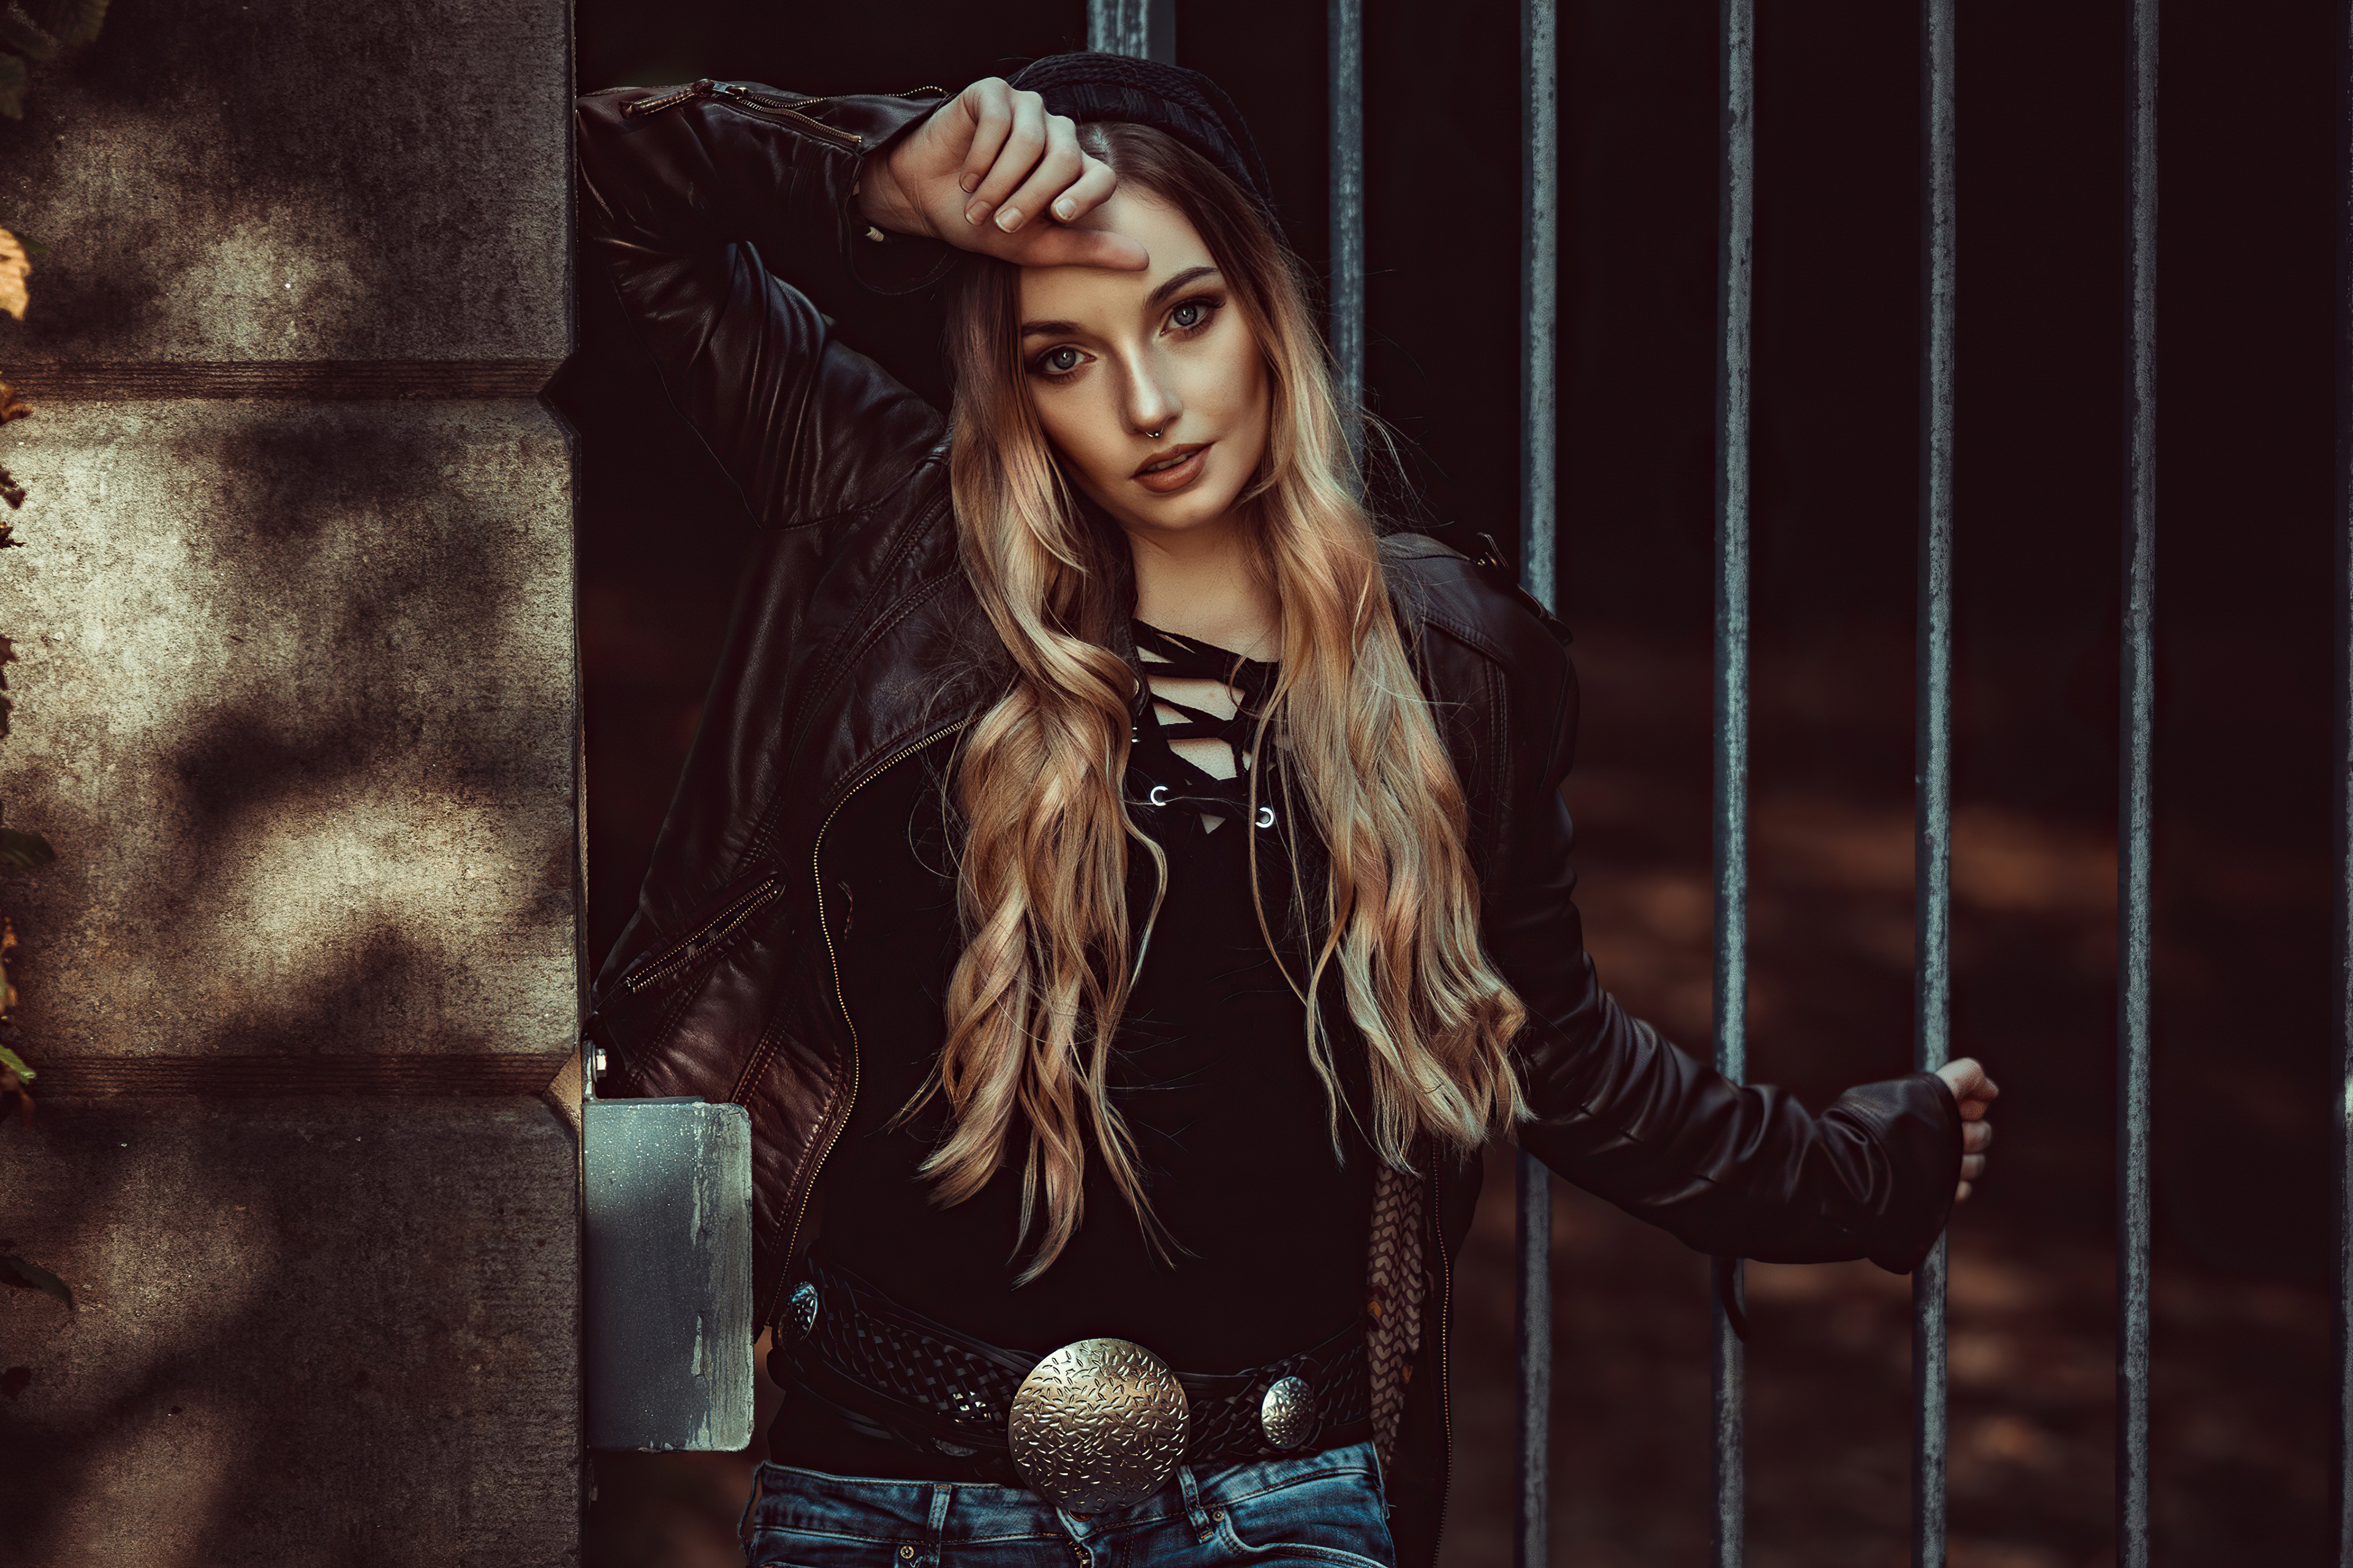 Wallpapers young girls leather jacket on the desktop